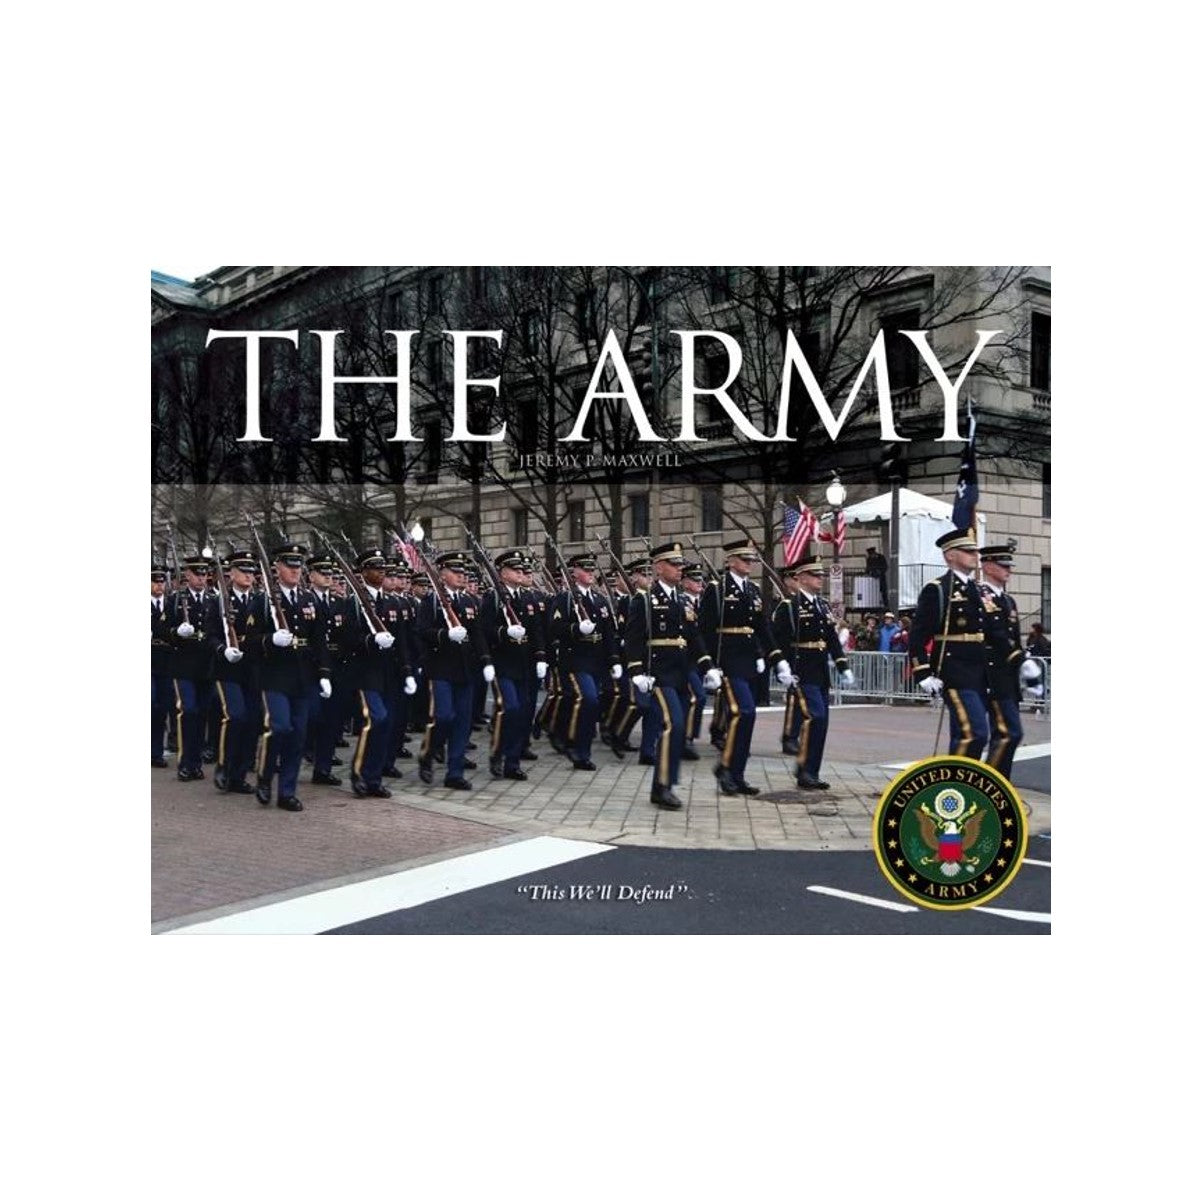 The Army